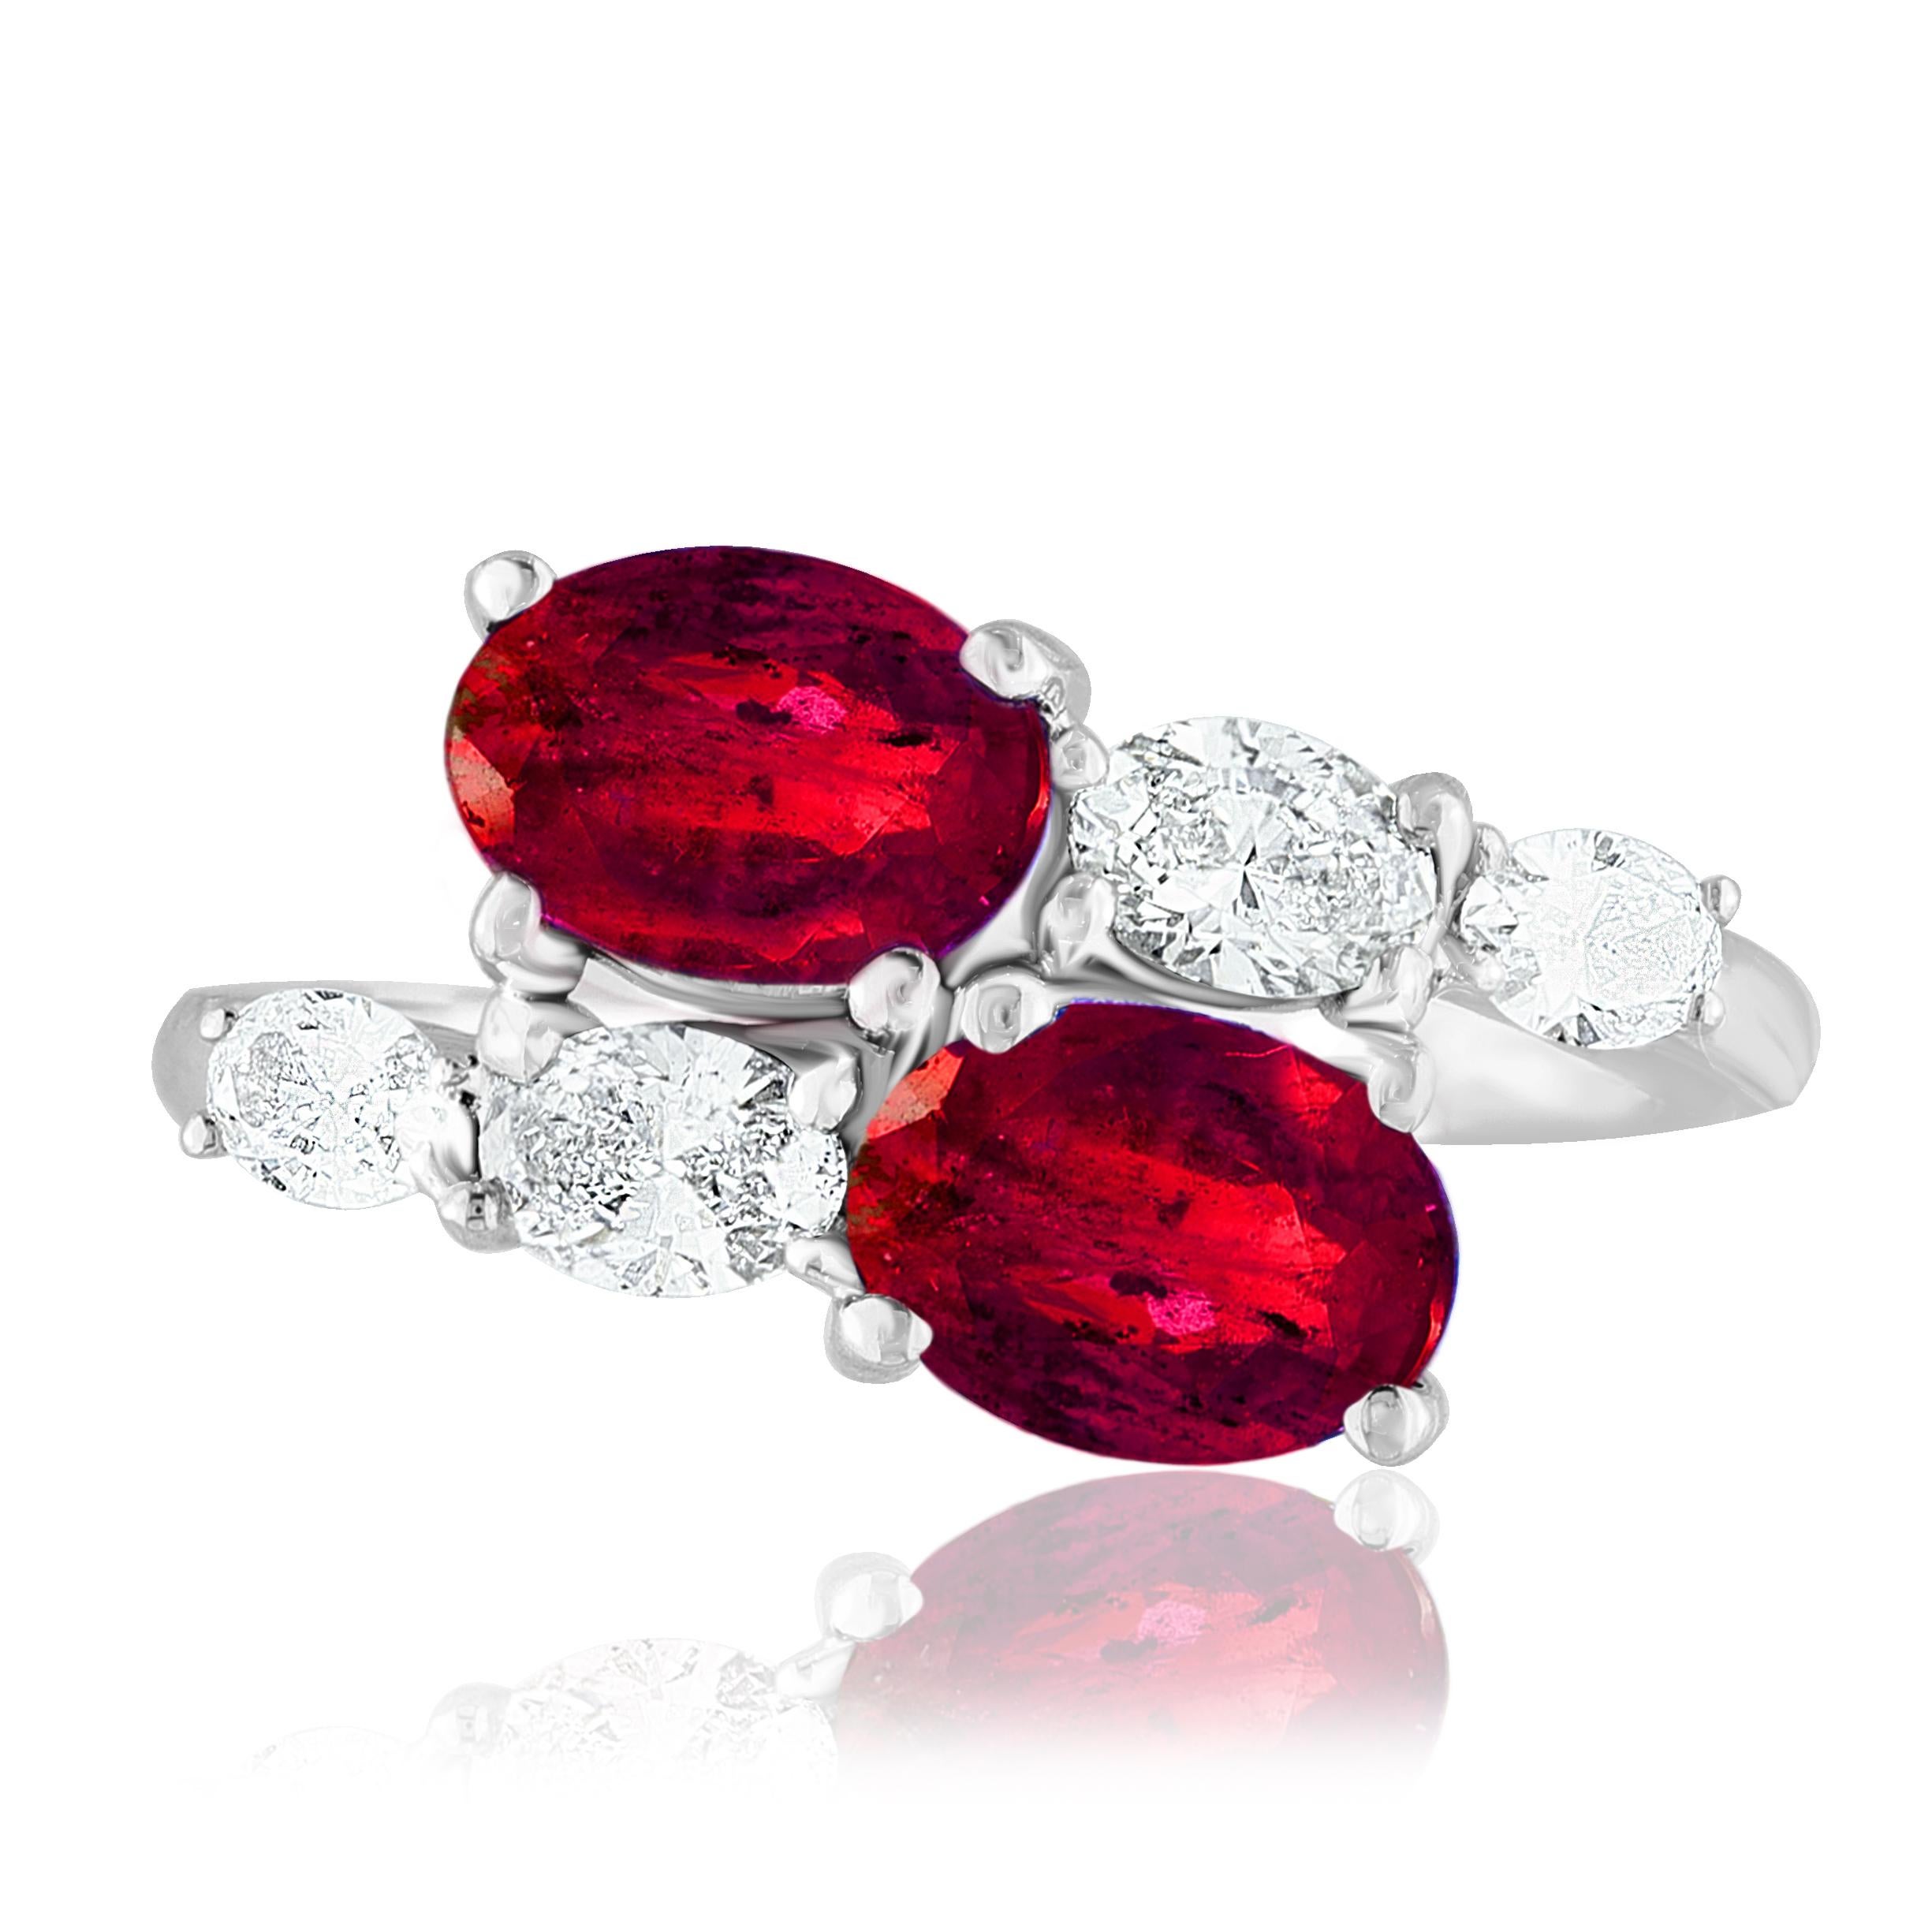 The stunning forever-together Toi et Moi ring features 2 Oval cut Rubies embraced by east to west 4 oval diamonds. Handcrafted in 14k White Gold.
2 oval Rubies in the center weigh 1.54 carats and 4 diamonds on the sides weigh 0.70 carats in total.
A